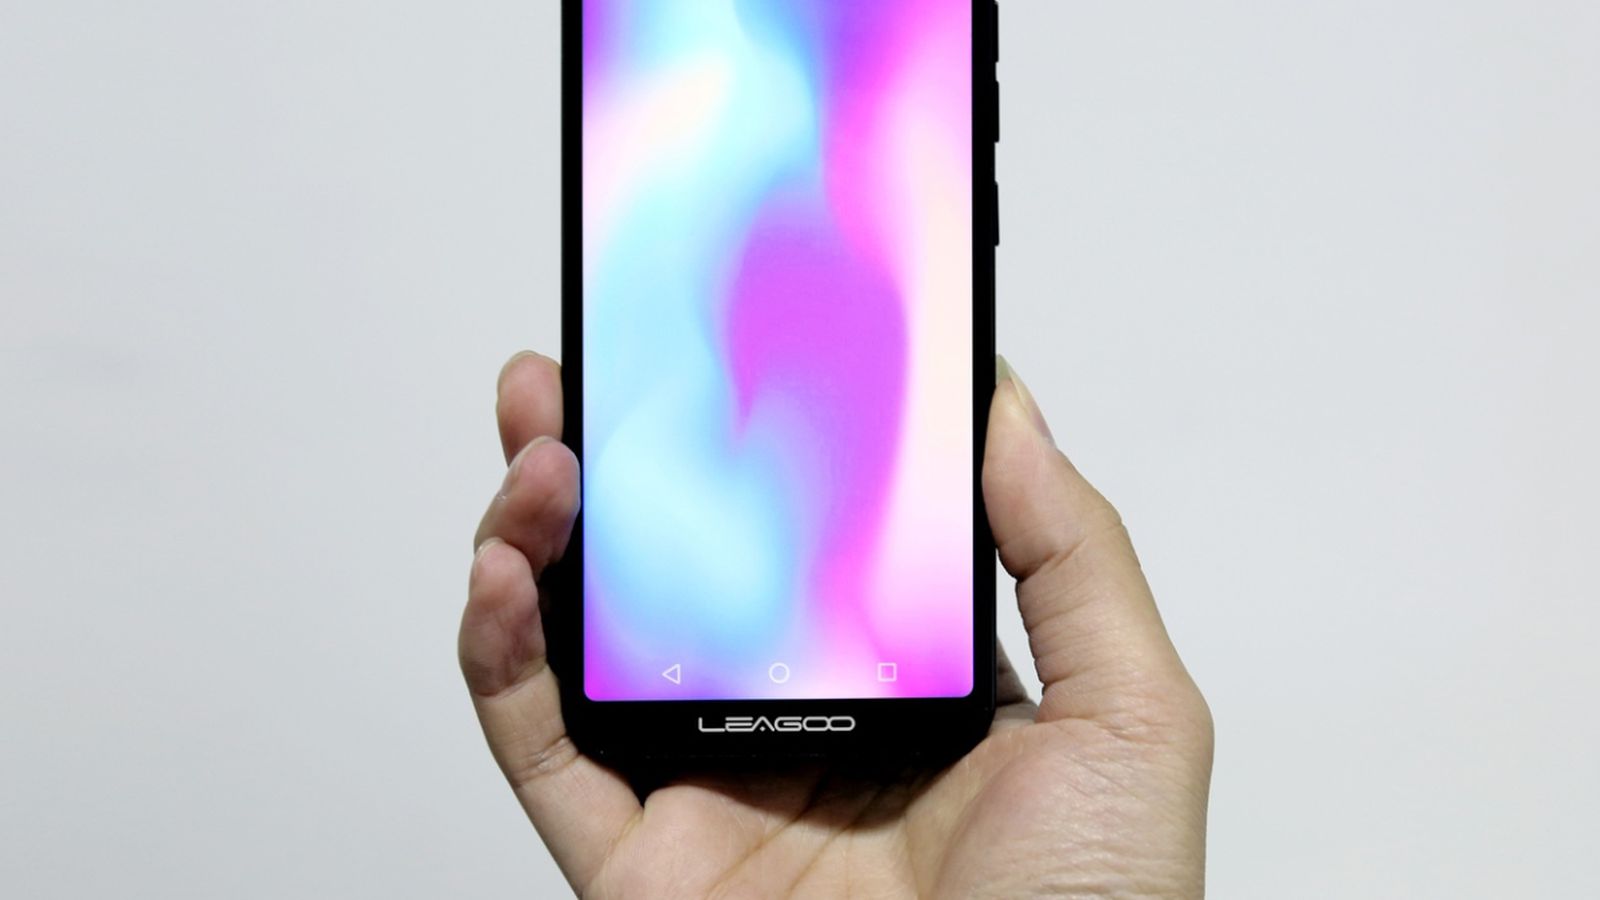 iPhone X Clone 'Leagoo S9' Will Cost $150 and Include 'Face Access 